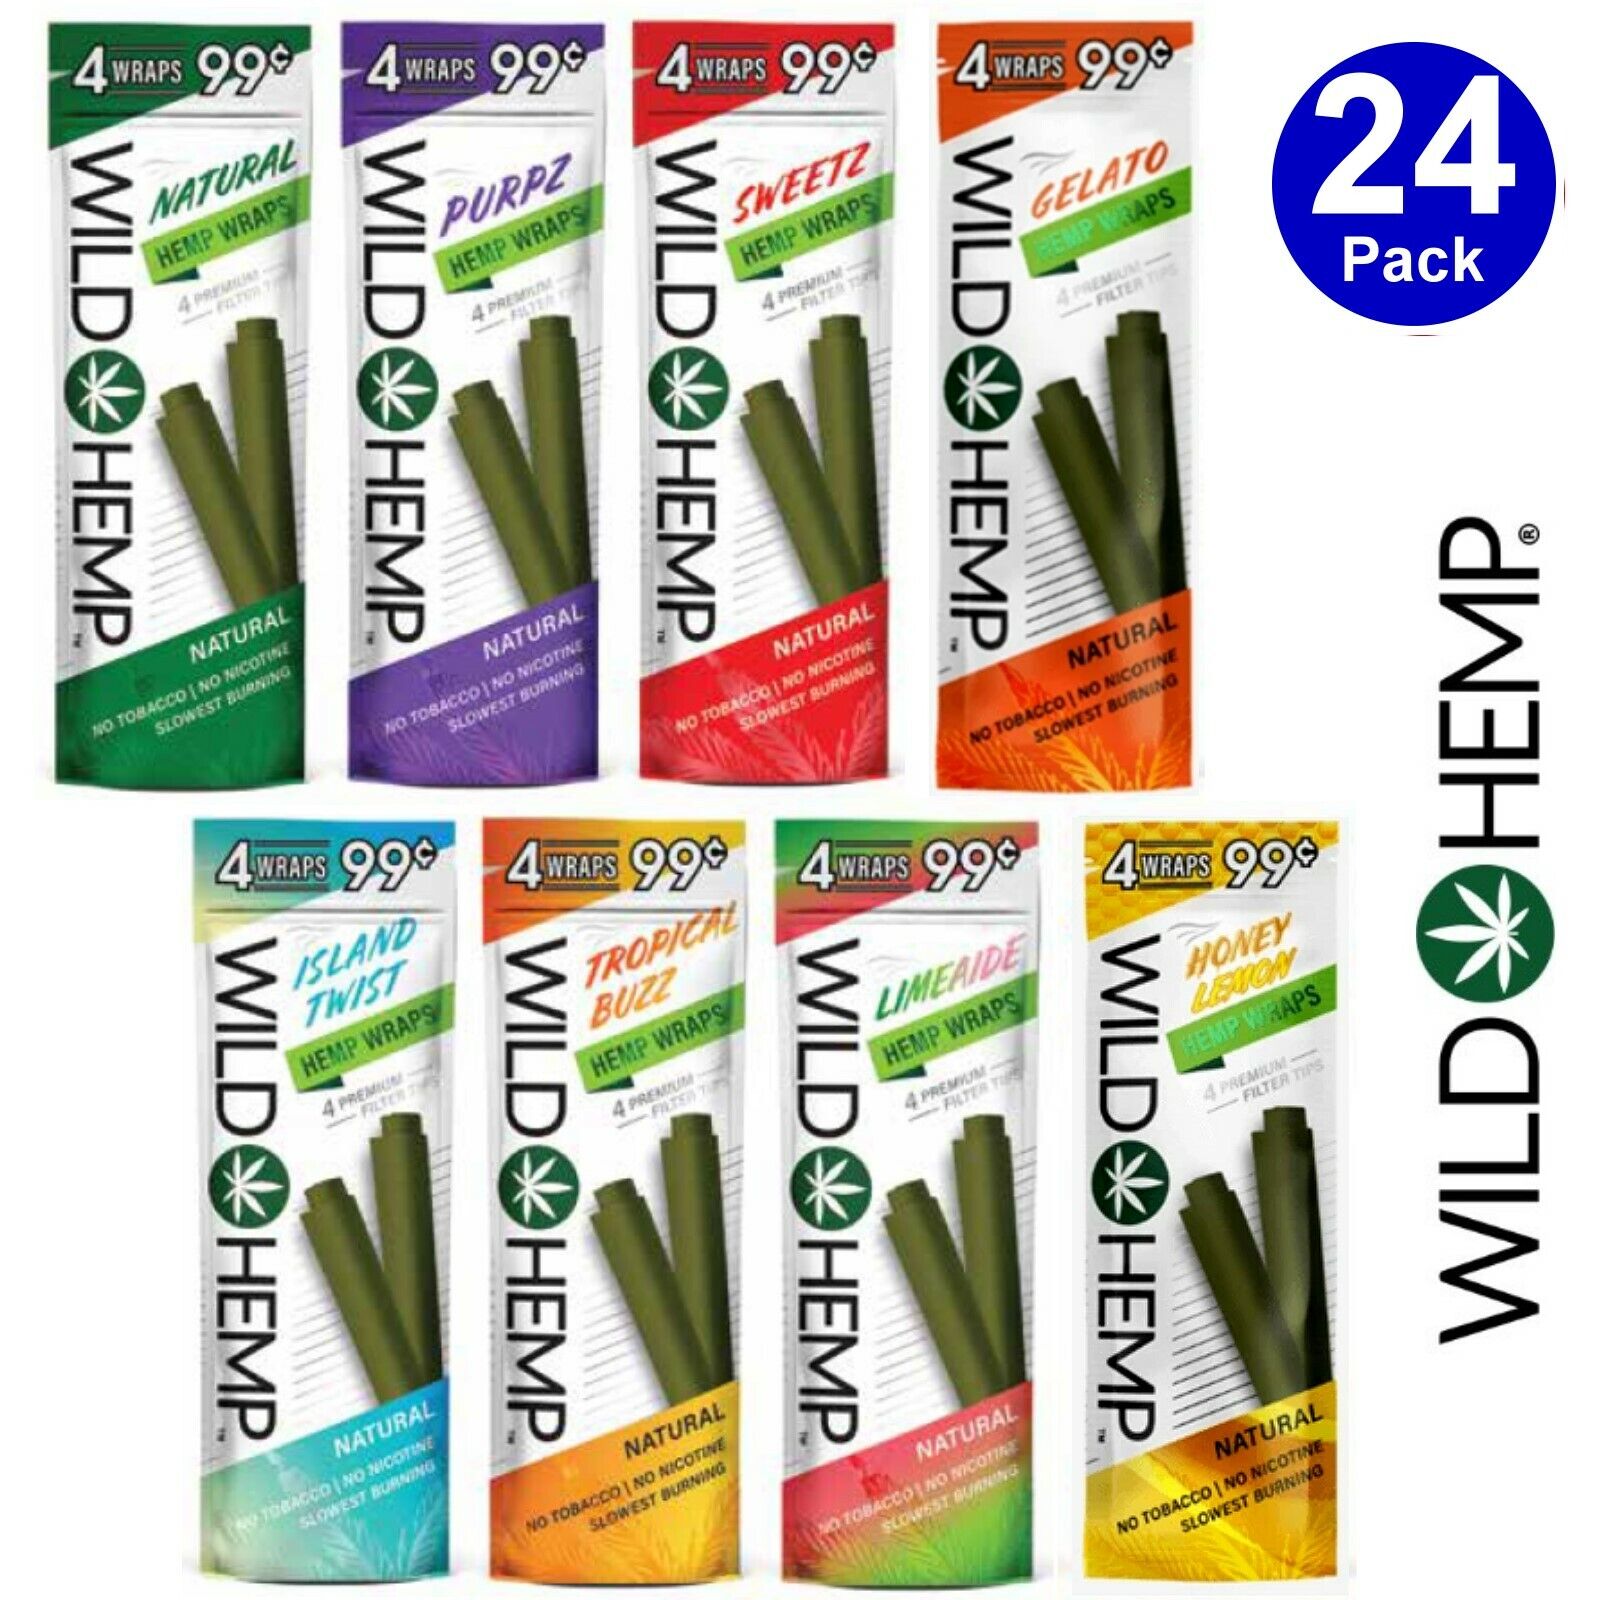 Wild H. Organic Wrap Variety Pack 24 Pouches, 4 Per Pouch - 96 Wraps Total